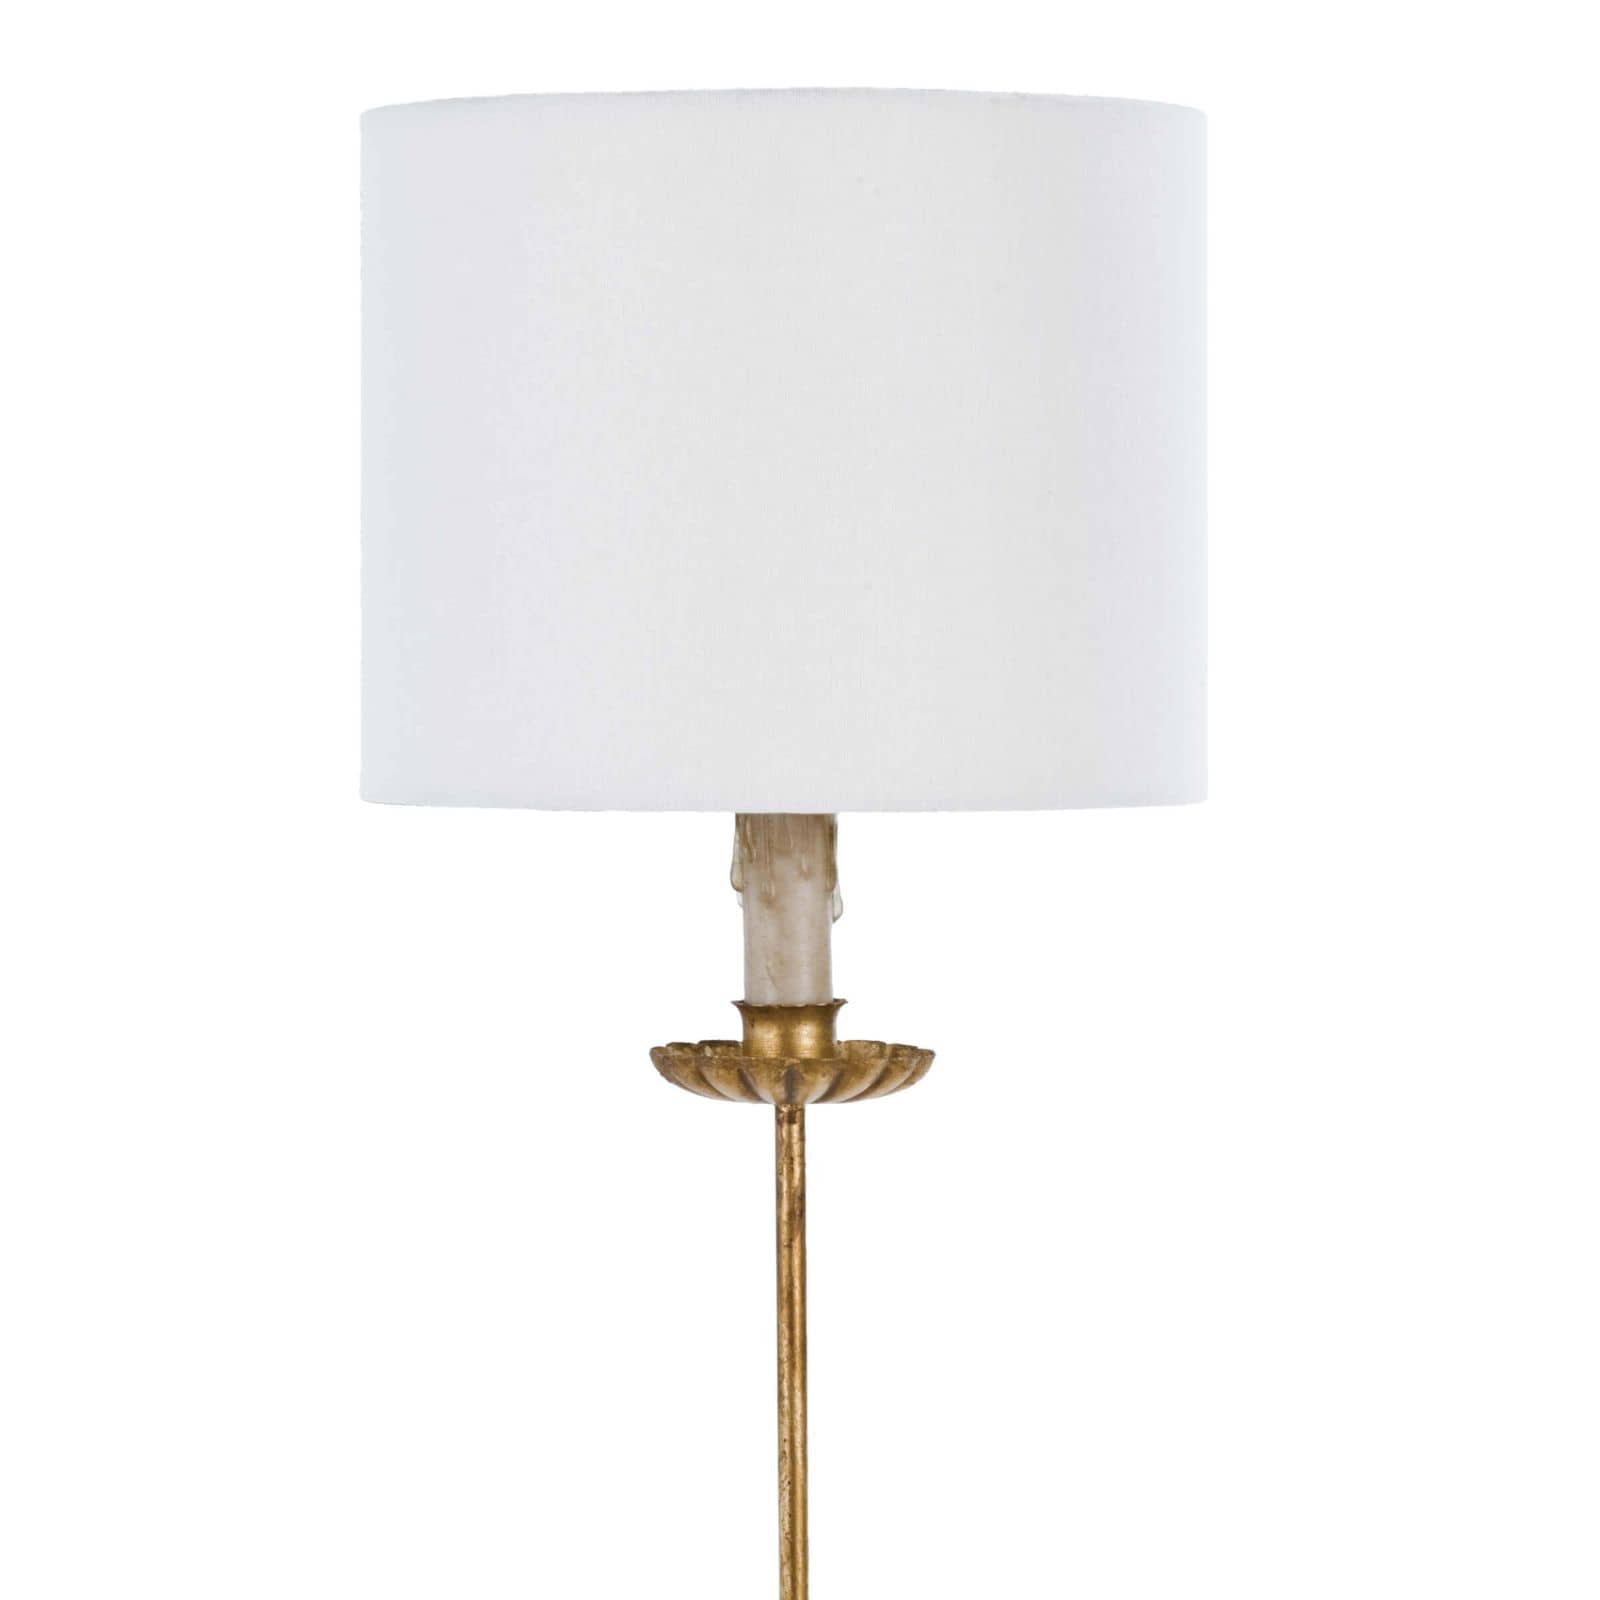 Clove Table Lamp with natural linen shade close up